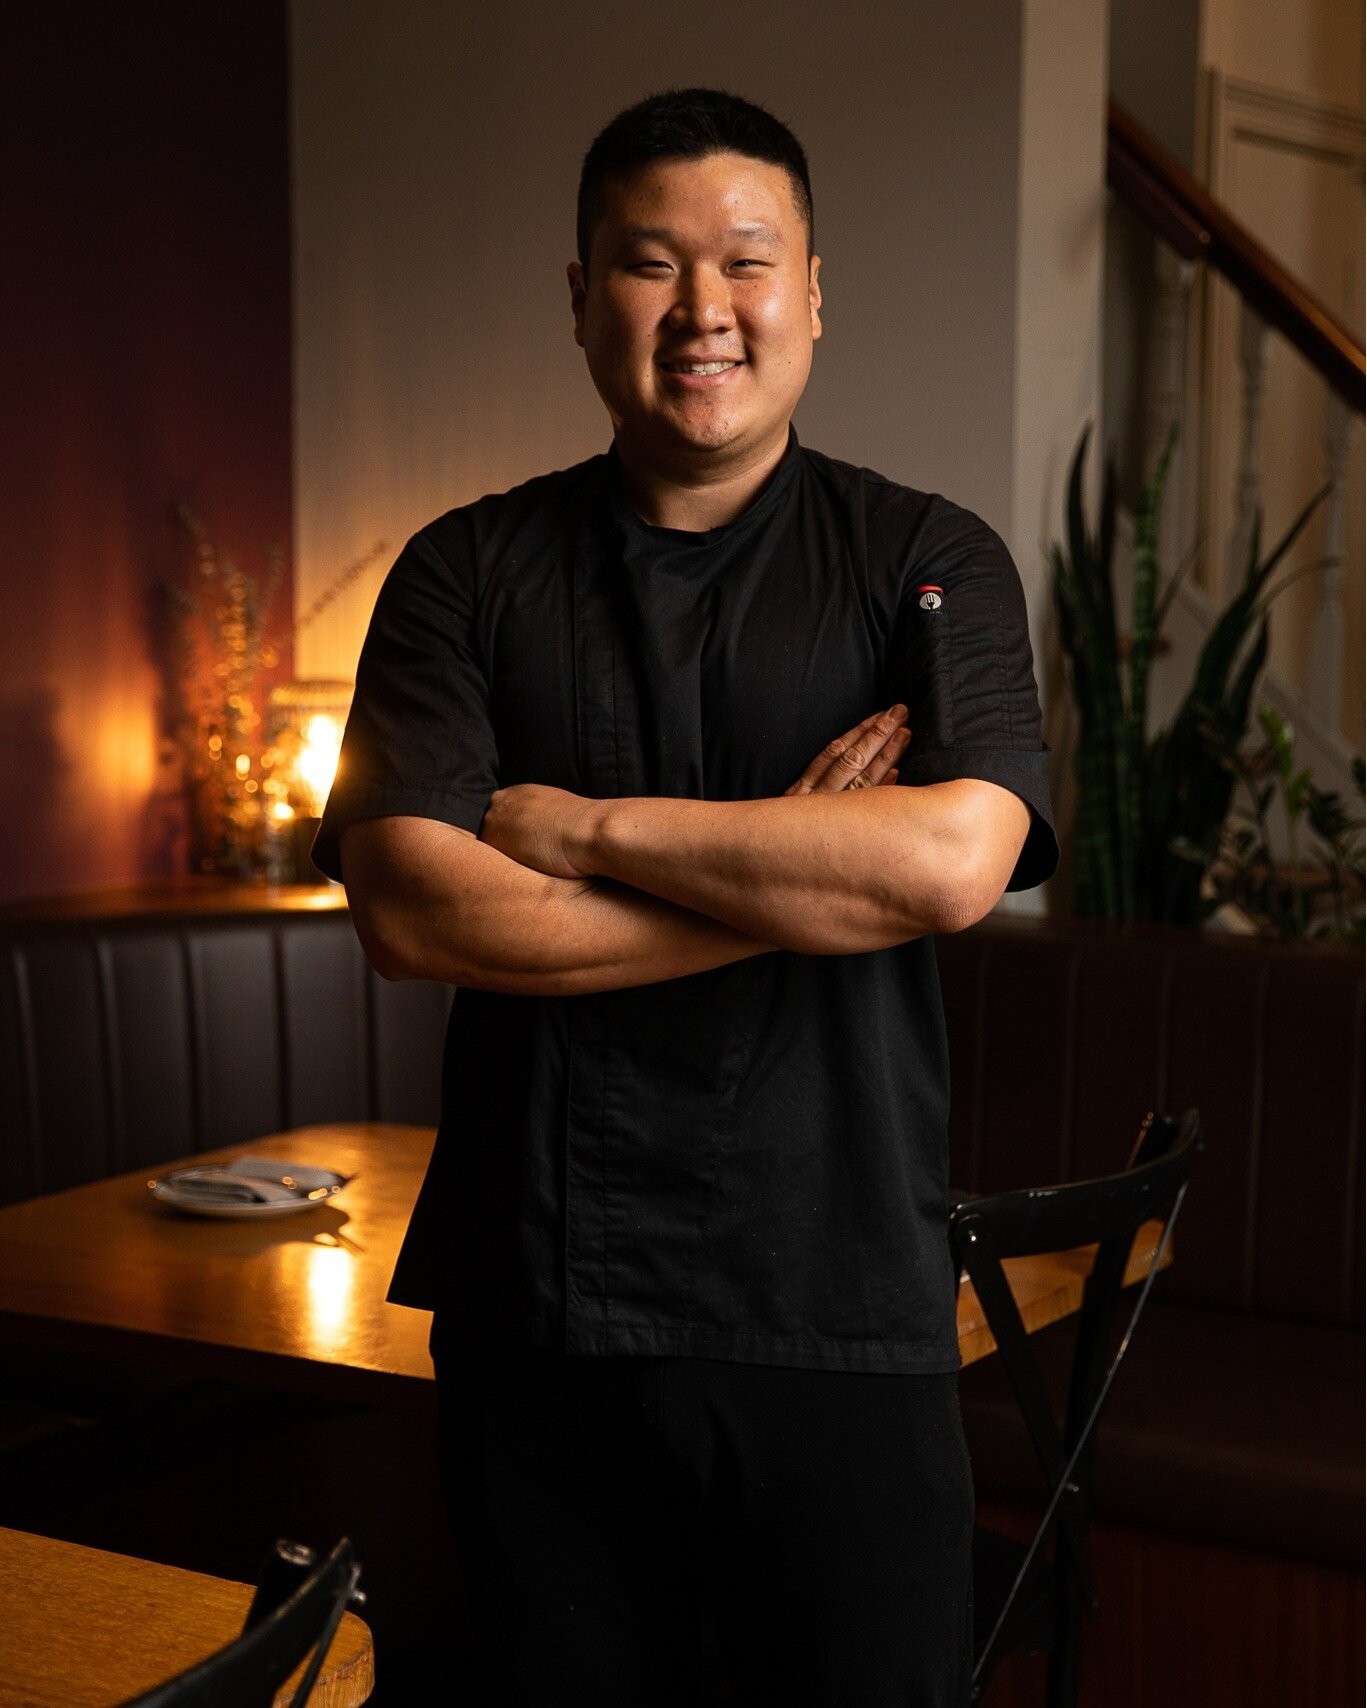 Say G'day to our Head Chef, David Chang. David's diverse culinary expertise, ensures delicious food using only the best seasonal ingredients. 

Dont't just take our word for it and secure a table today via the link in bio.